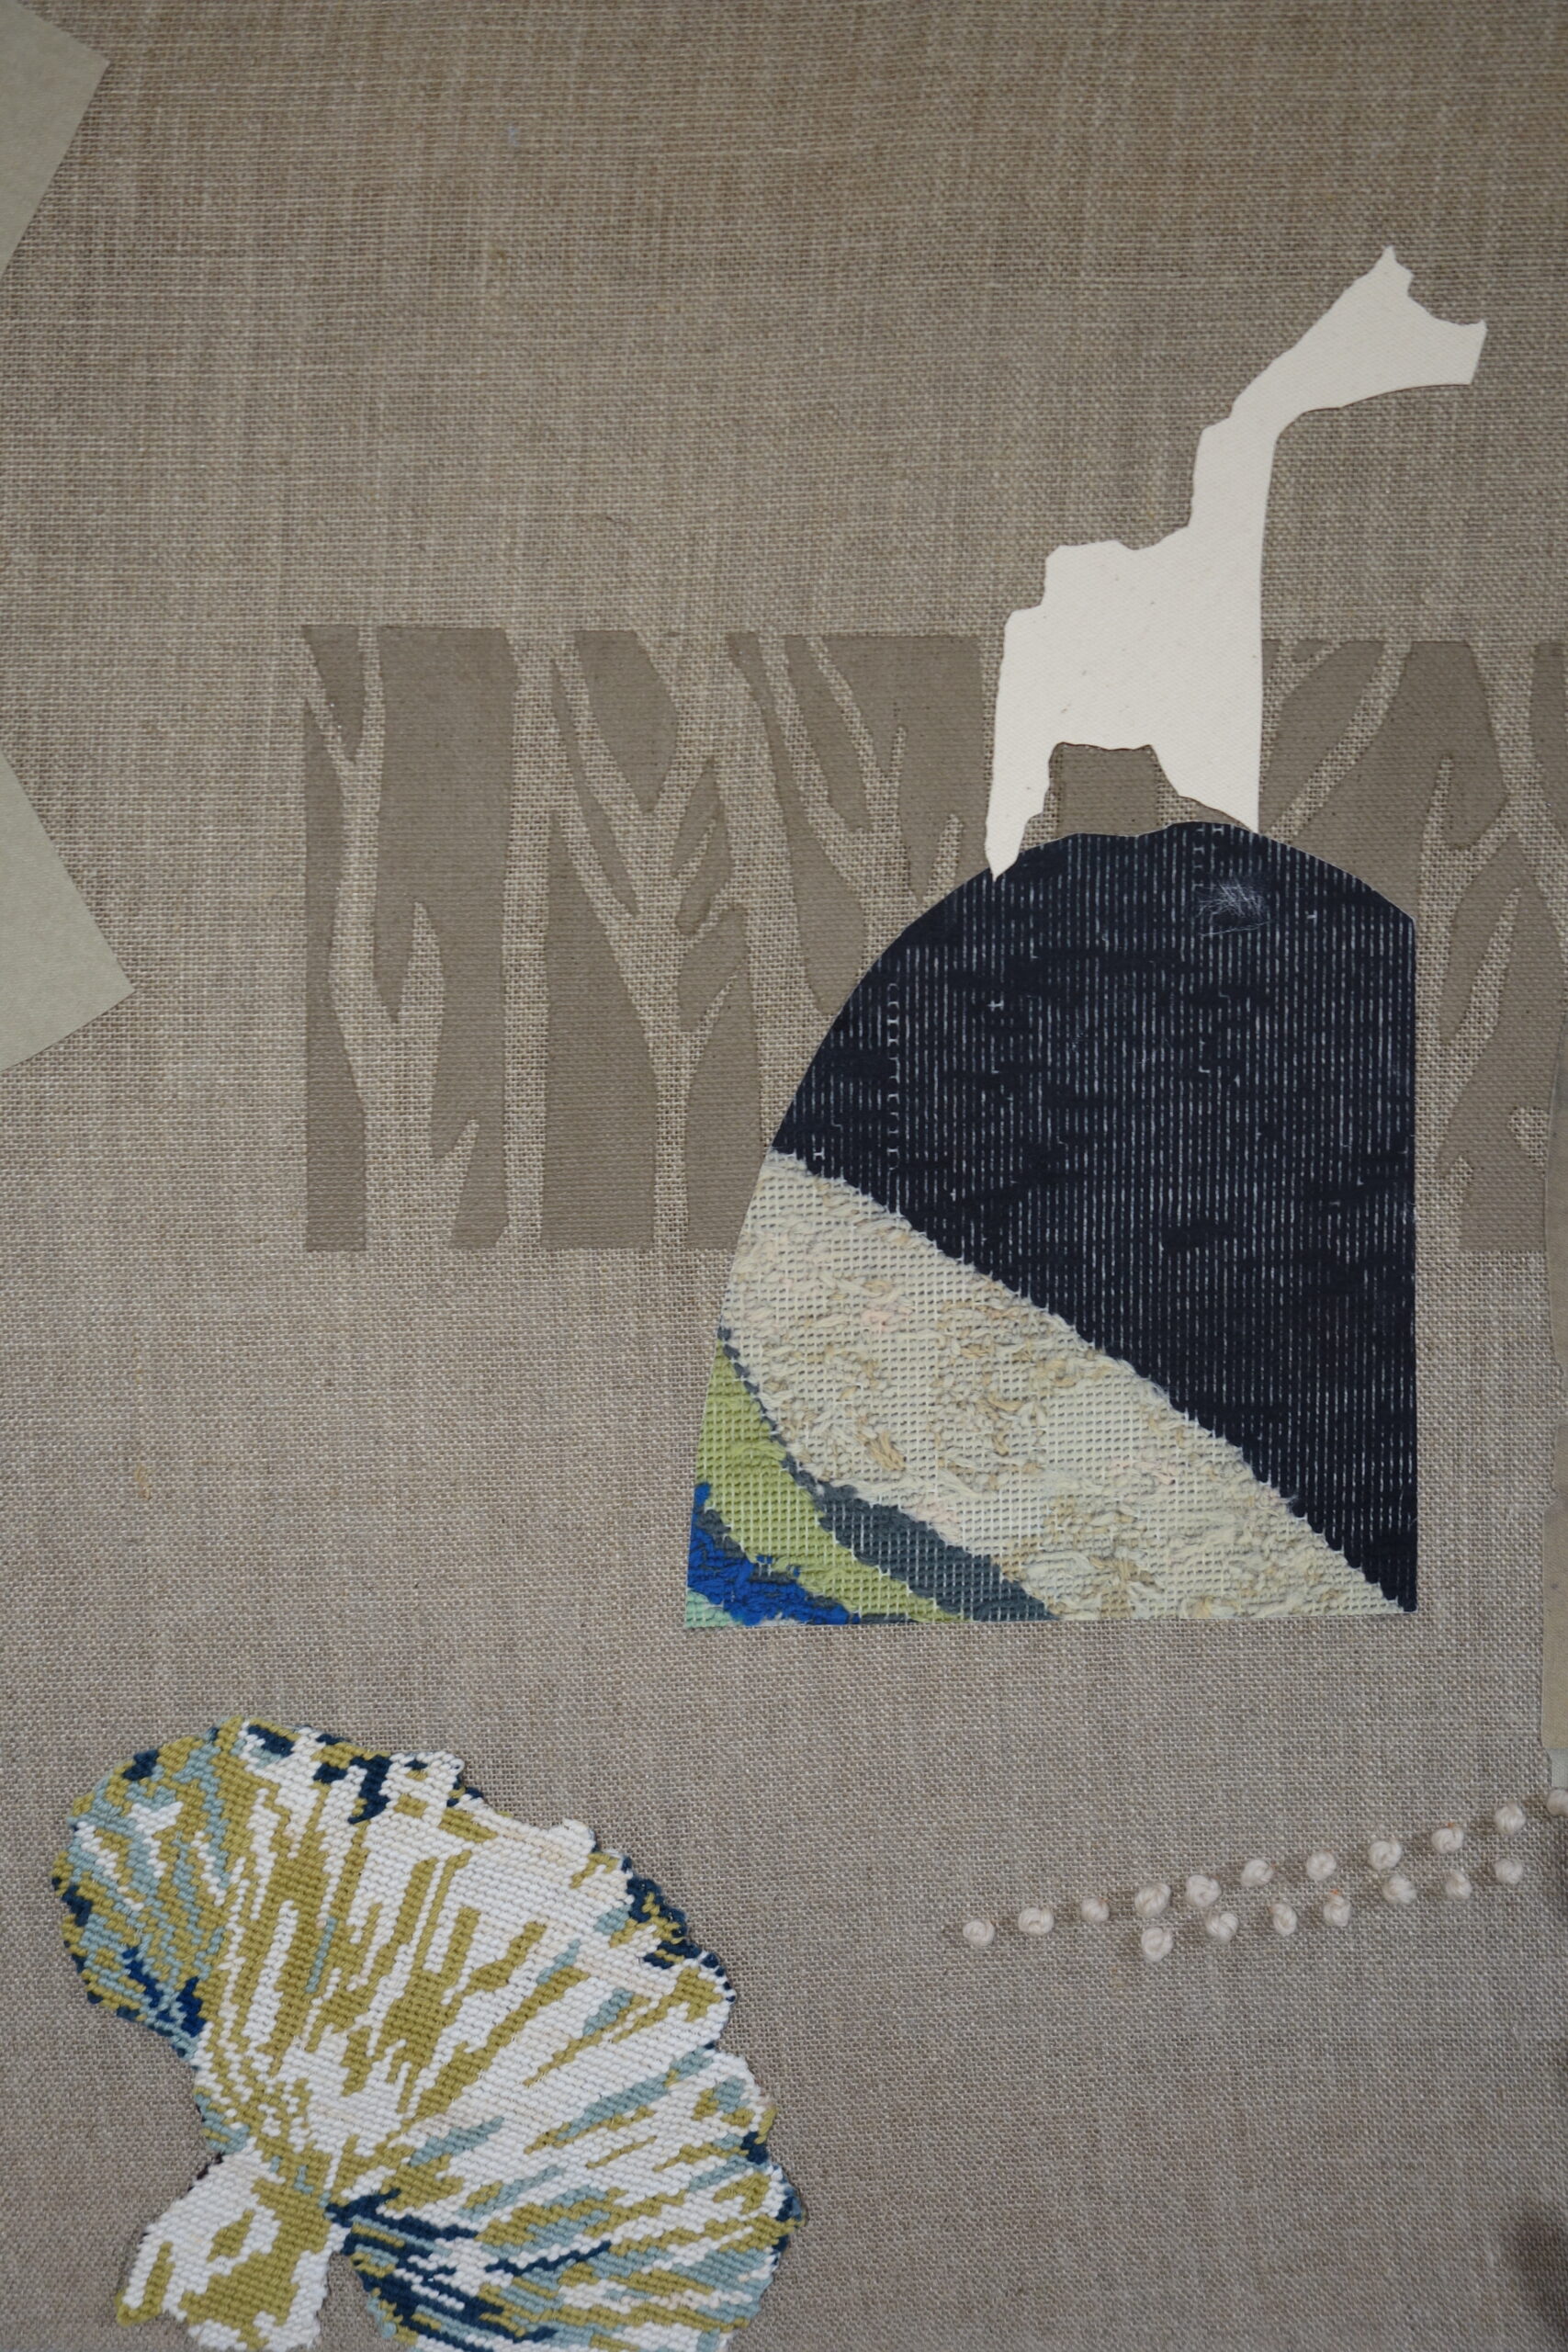 fragments of tapestry, collage and embroidery in the shape of statues and organic forms are scattered across a pale grey-brown linen